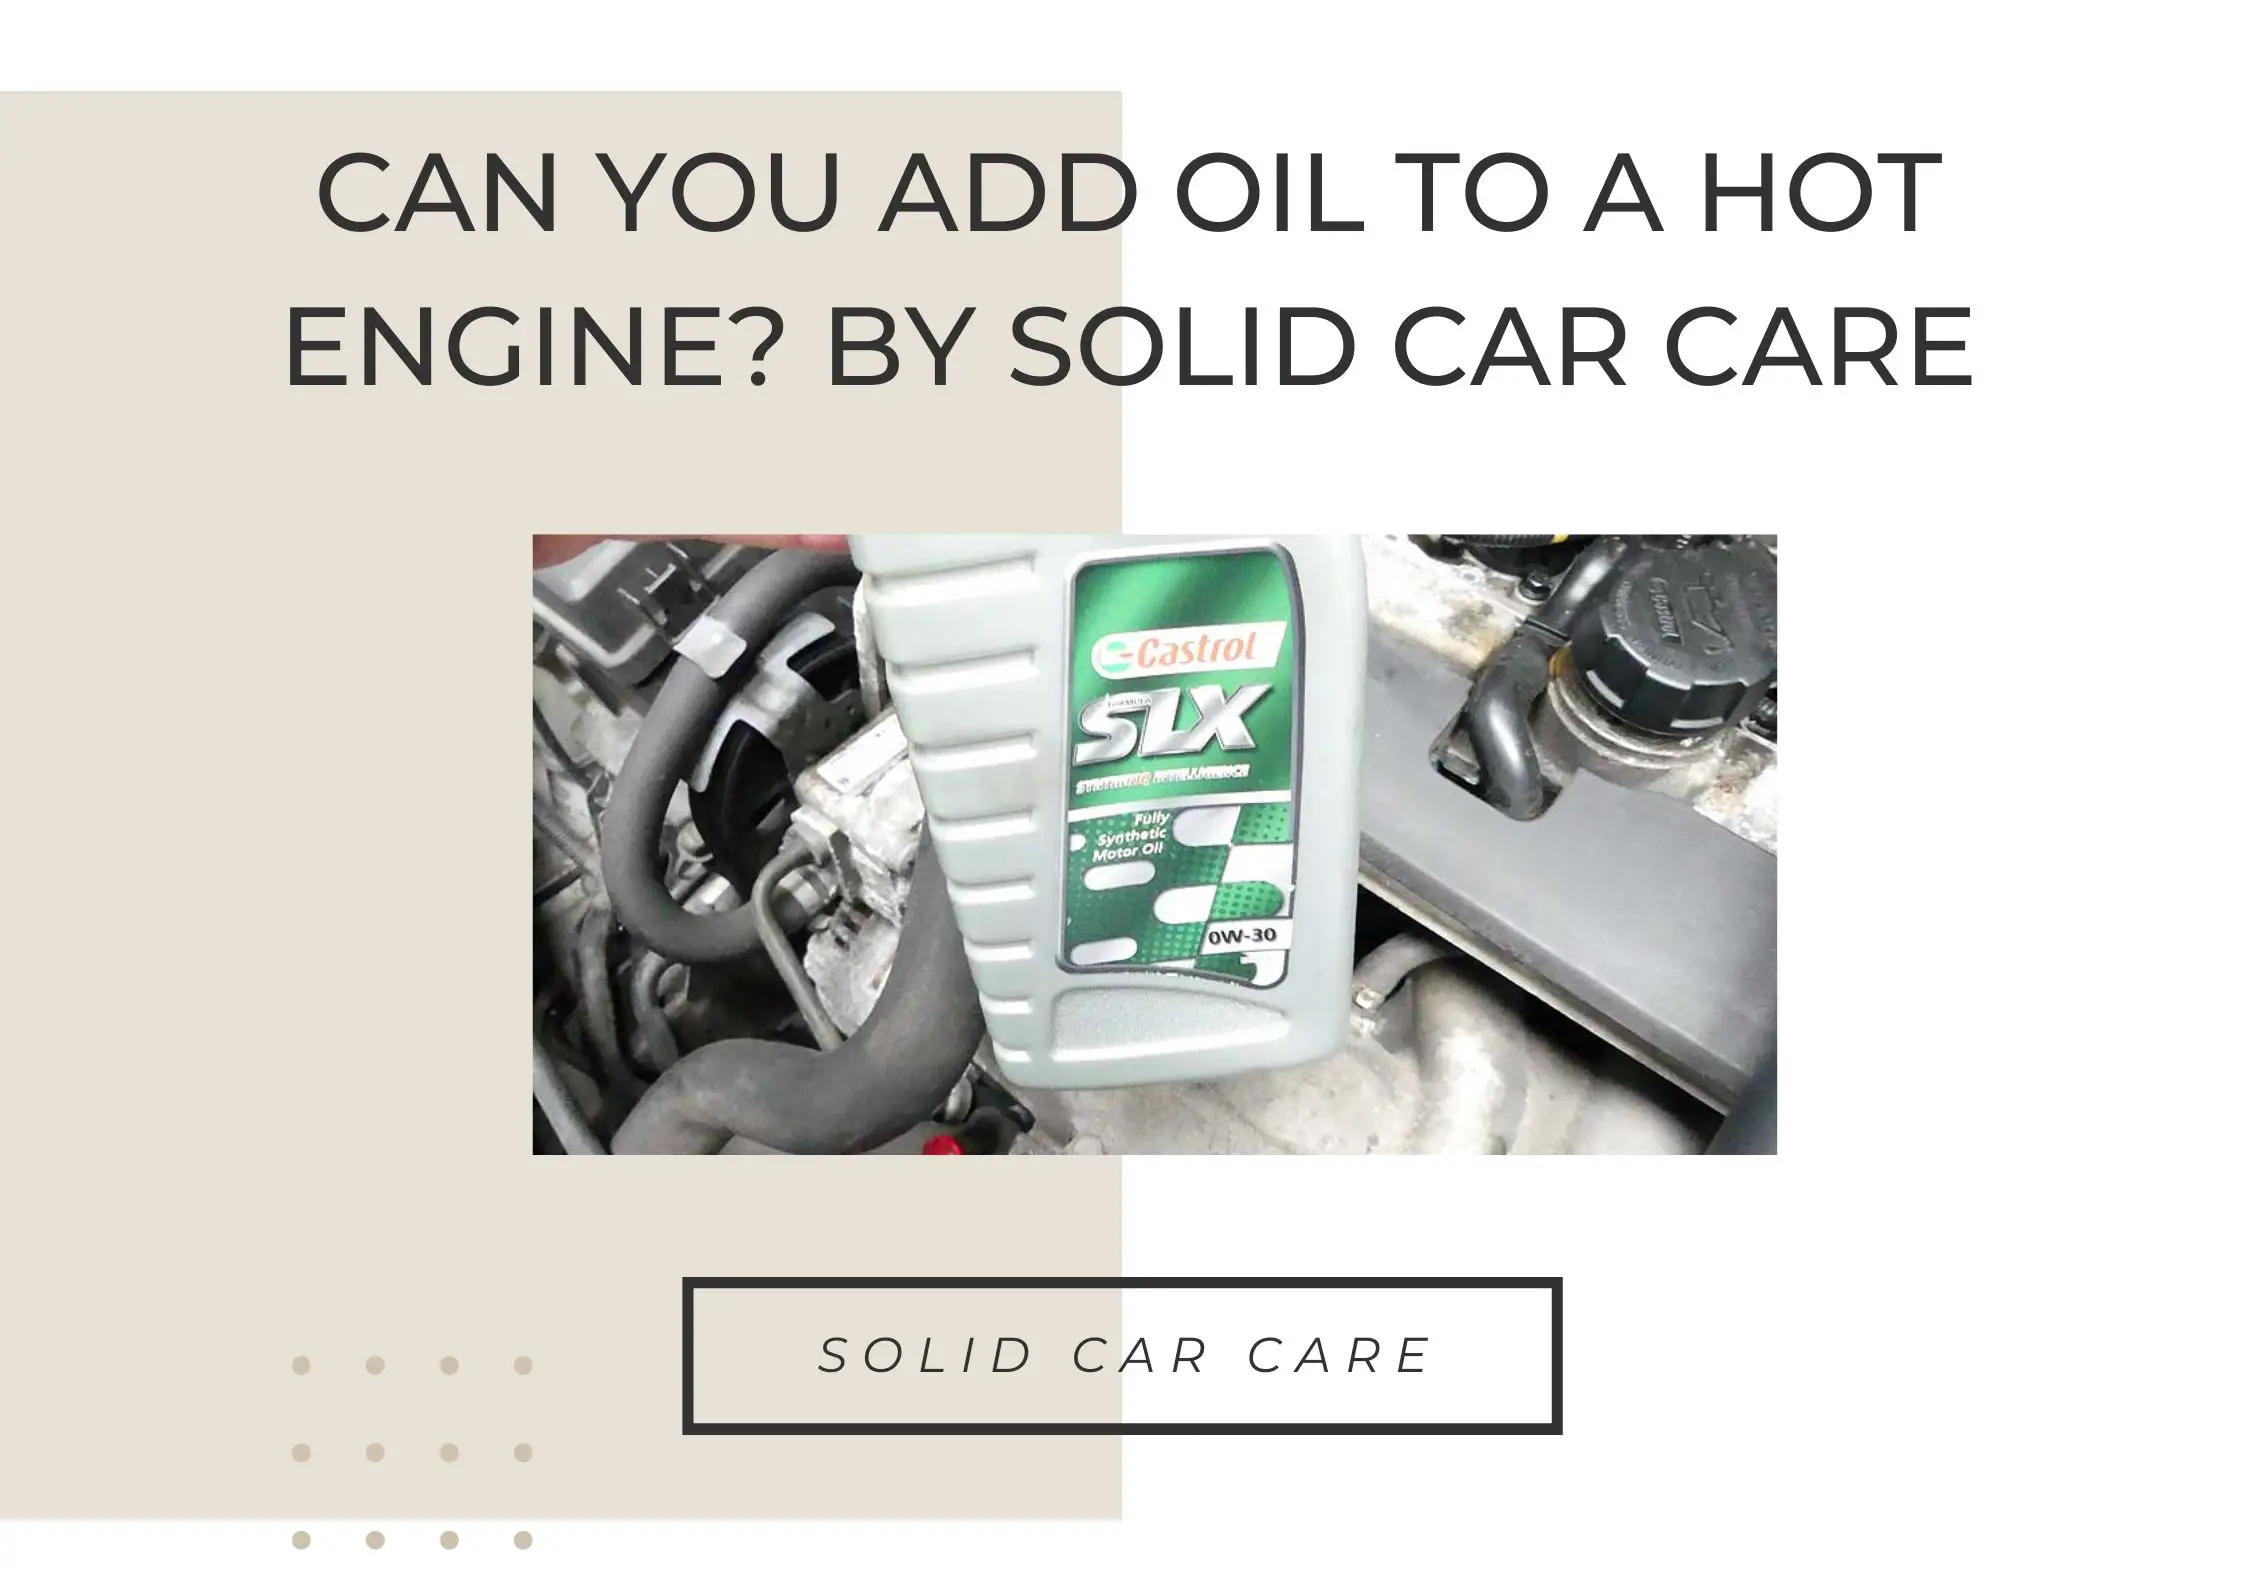 Can You Add Oil to a Hot Engine